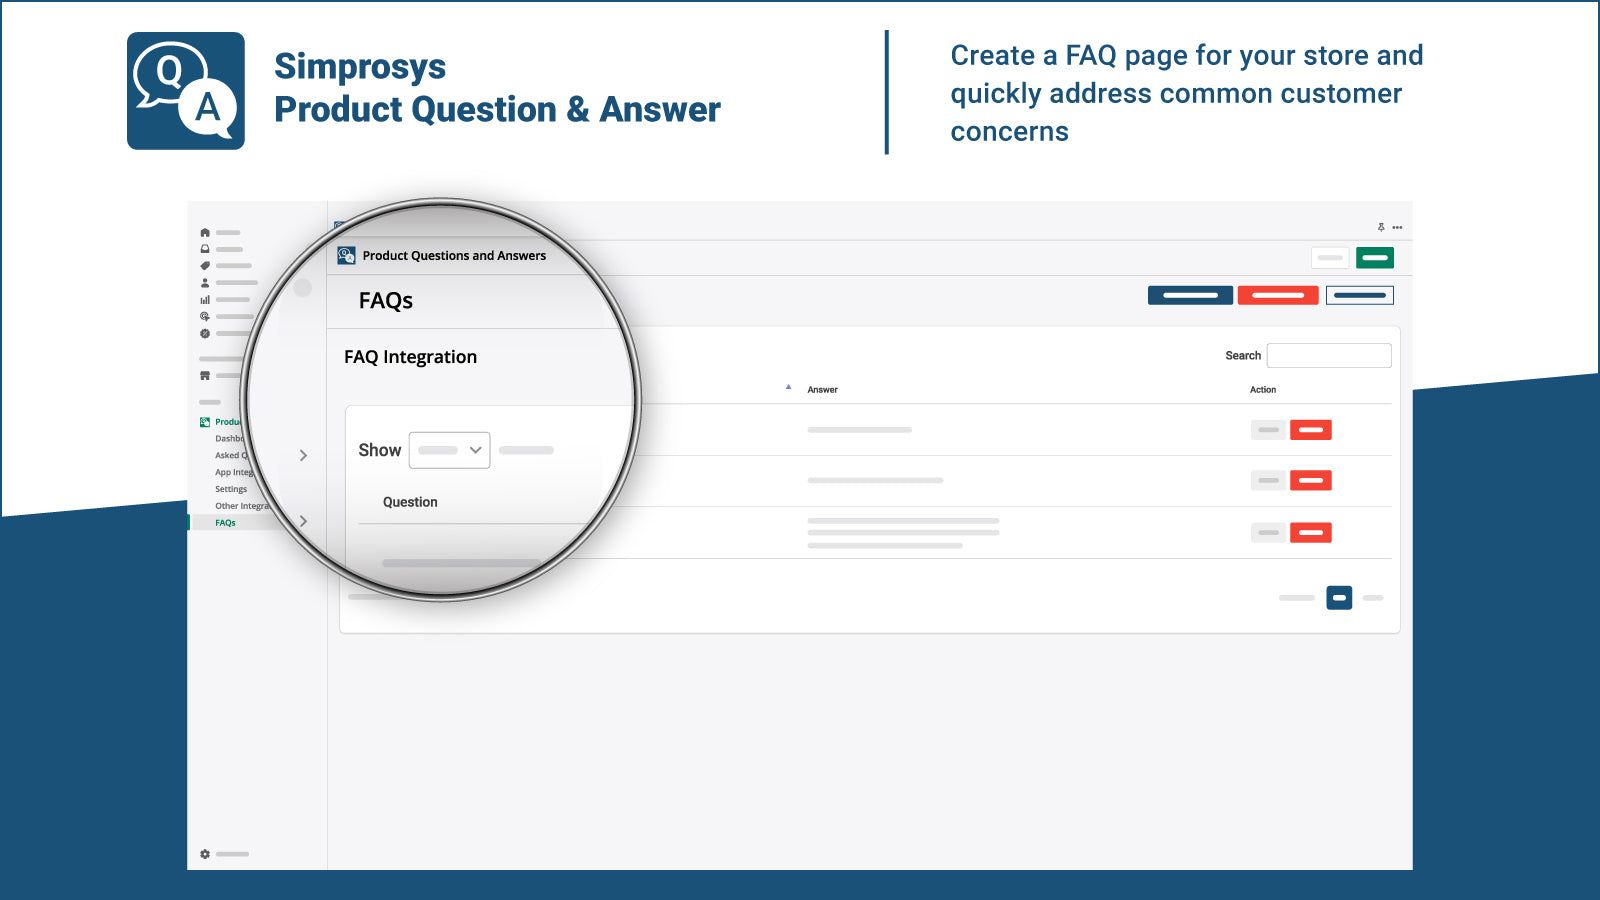 FAQ page backend management interface in the app - Product Q&A